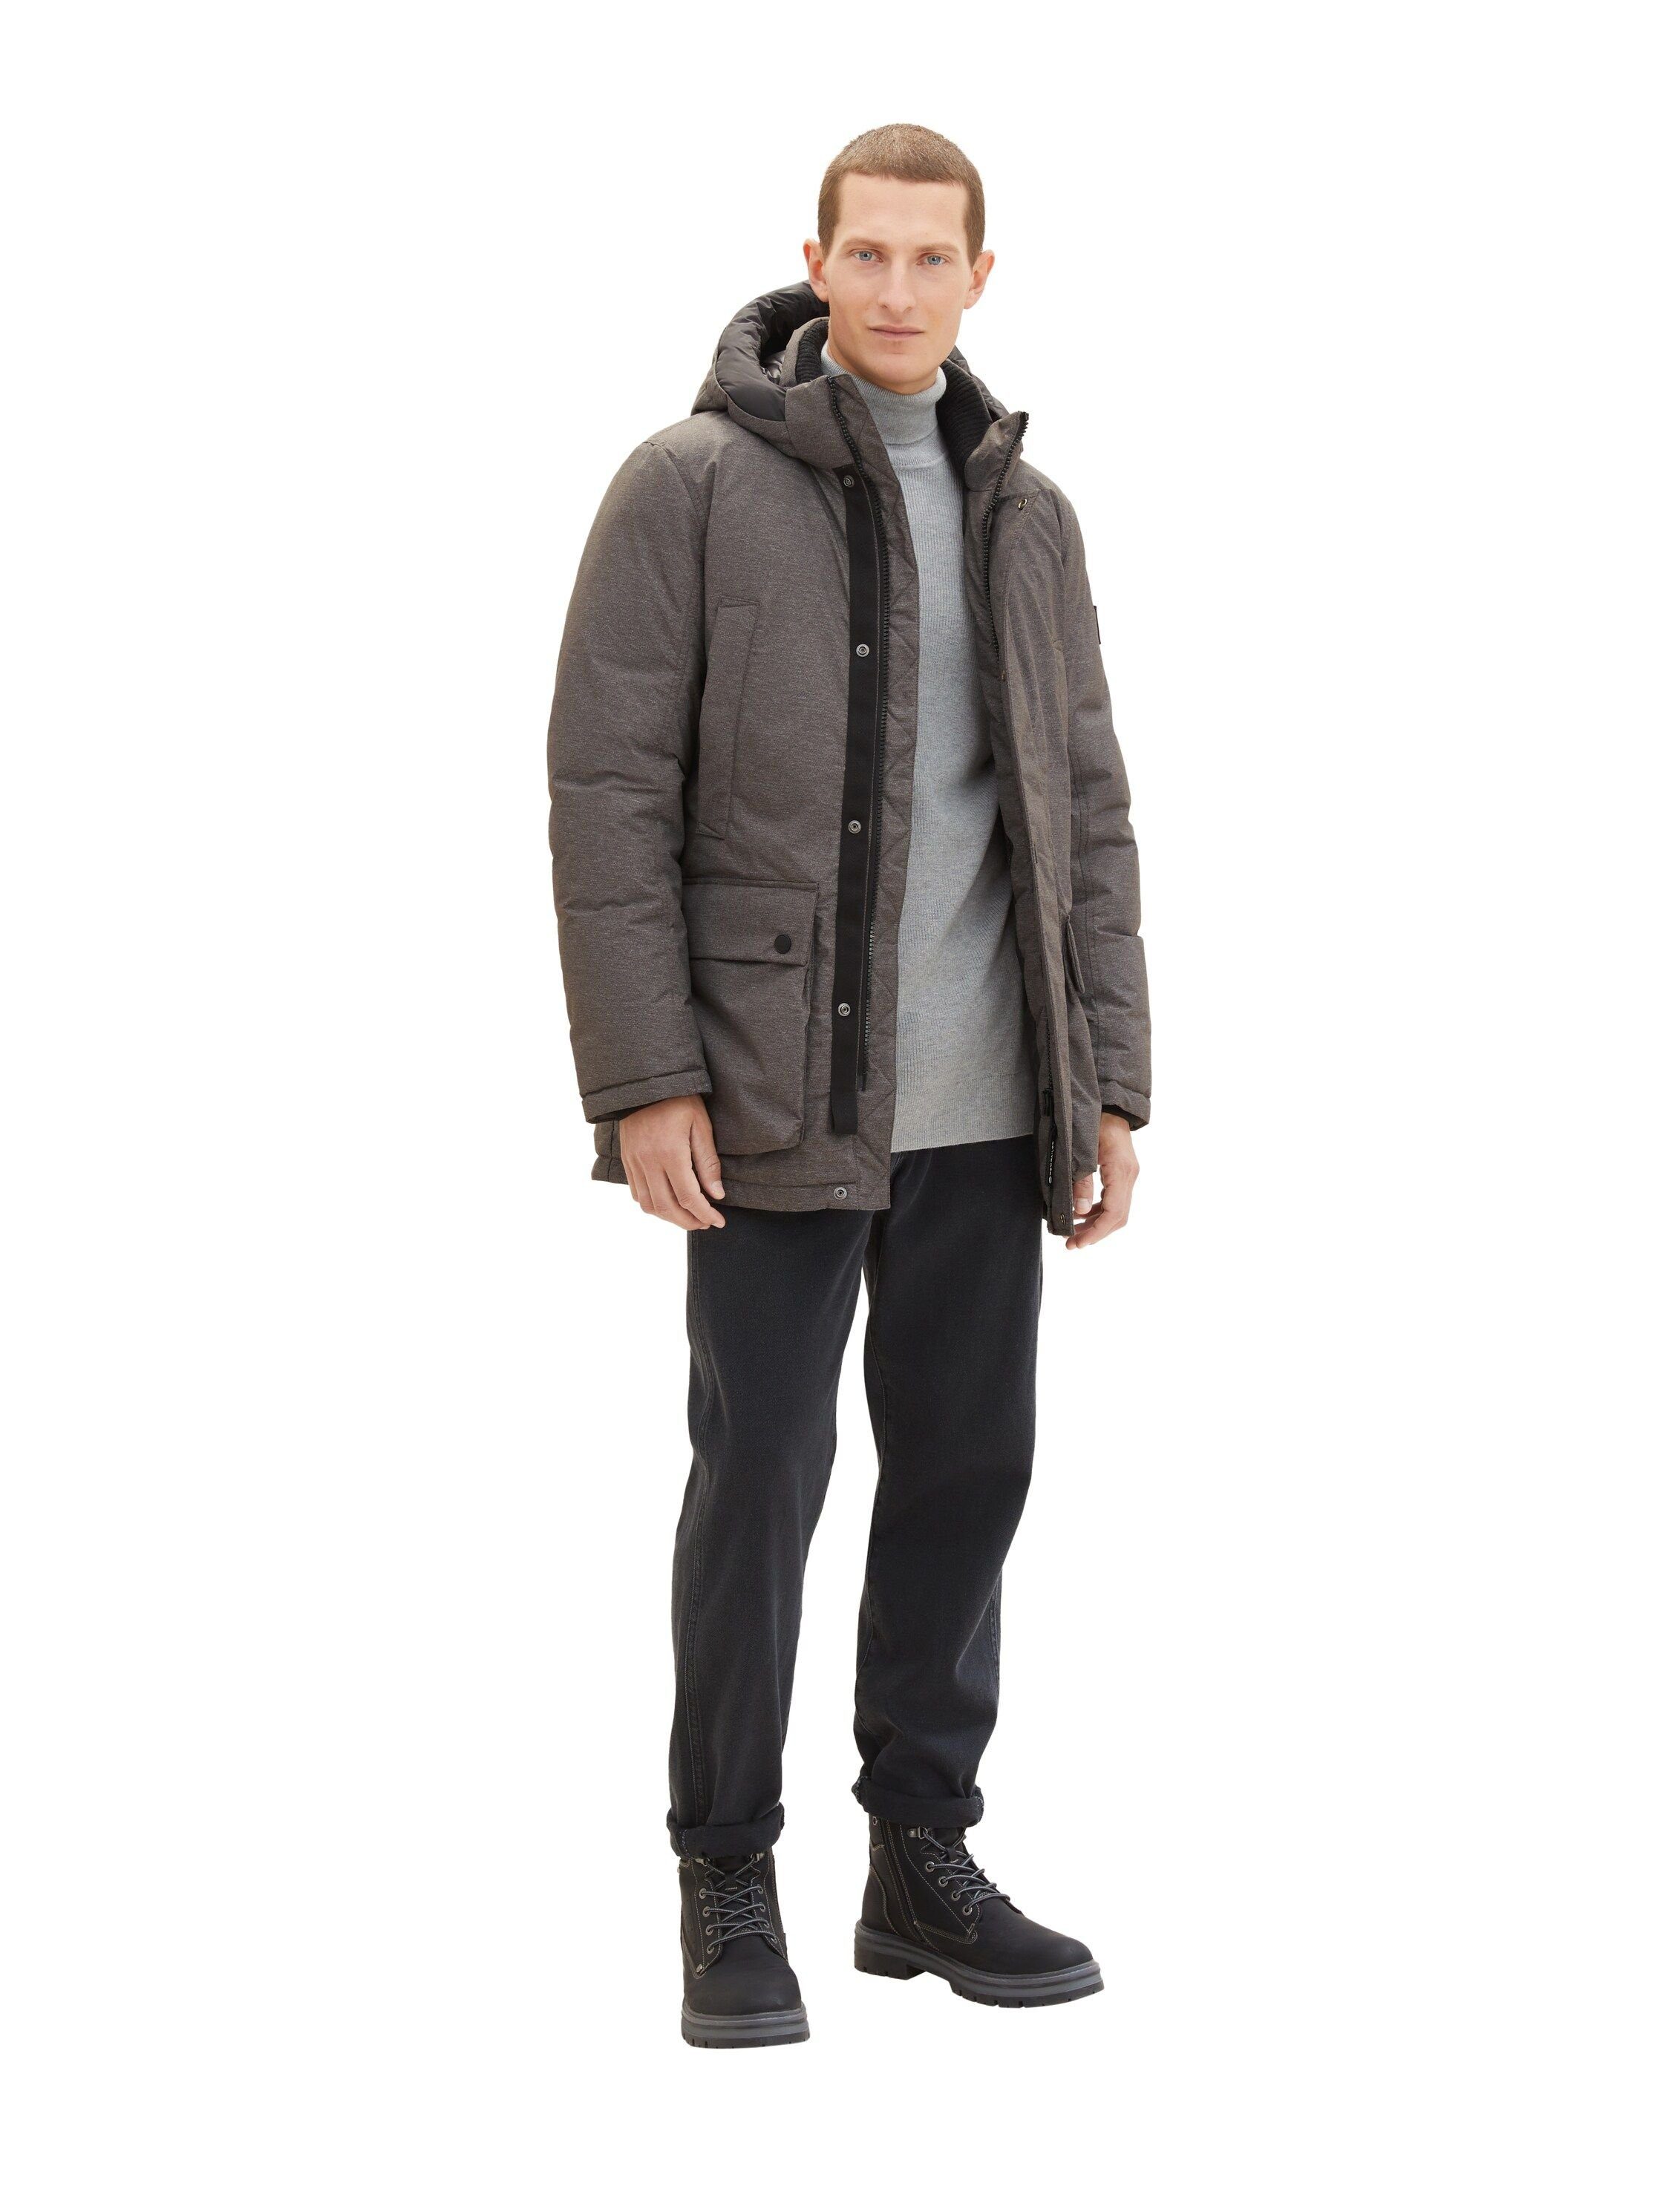 TOM grey TAILOR Outdoorjacke structure puffer